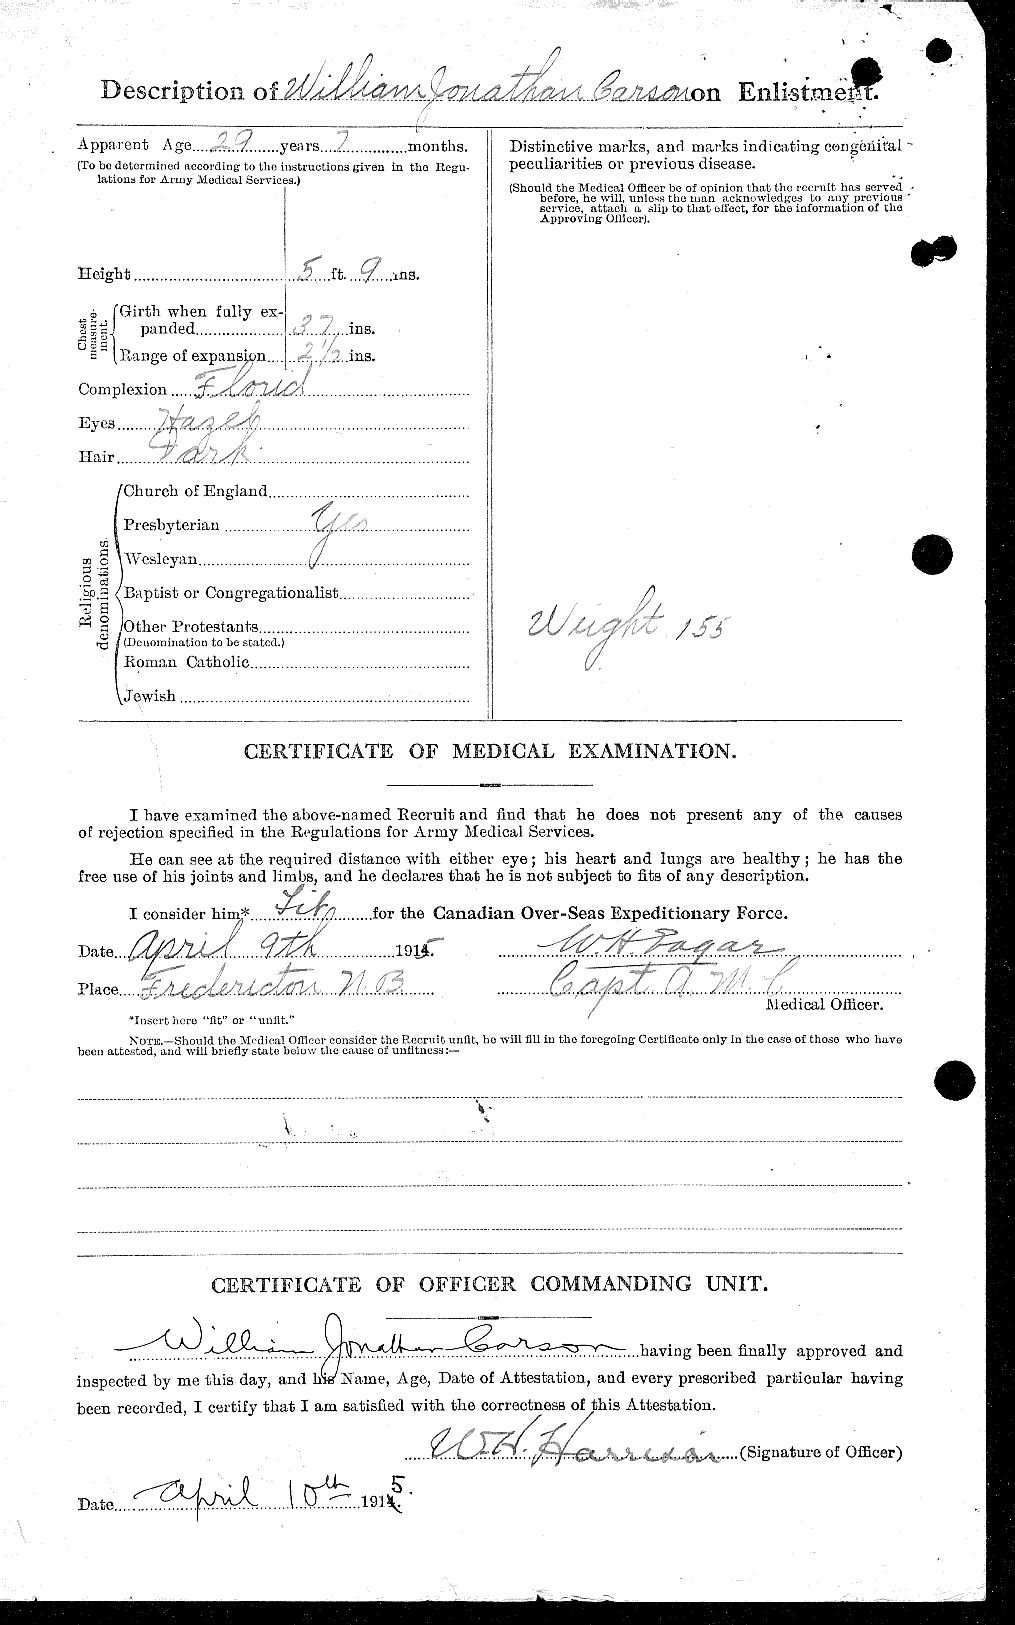 Personnel Records of the First World War - CEF 010877b